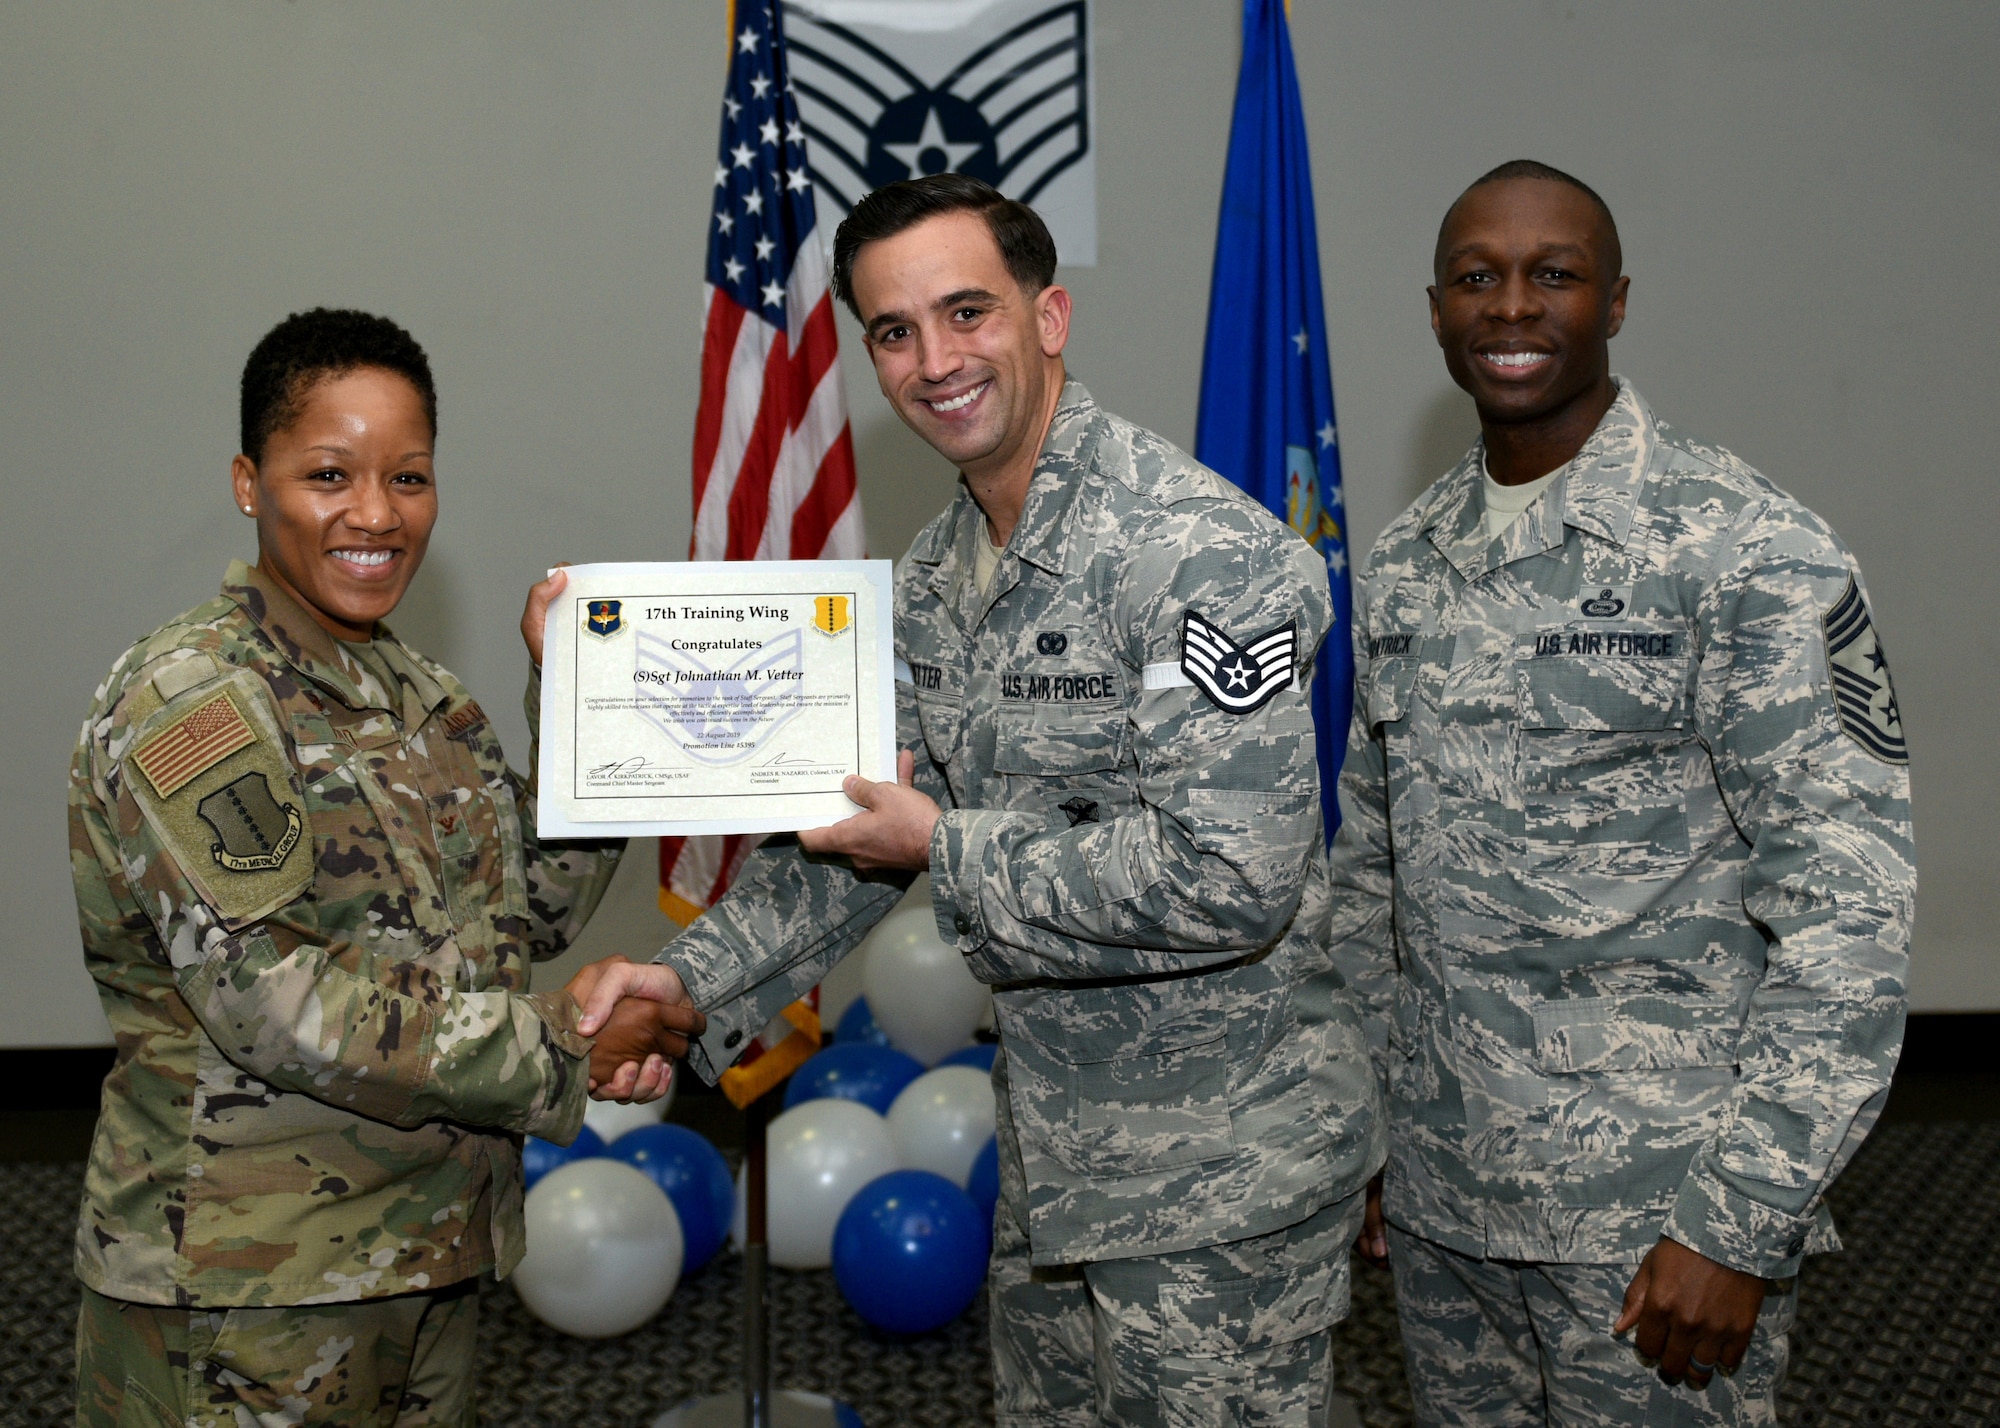 U.S. Air Force Staff Sgt. select Johnathan Vetter, 17th Security Forces Squadron, receives his promotion certificate during the staff sergeant release party at the event center on Goodfellow Air Force Base, Texas, August 23, 2019. Staff sergeants are highly trained technicians with supervisory and training responsibilities. (U.S. Air Force photo by Airman 1st Class Robyn Hunsinger/Released)